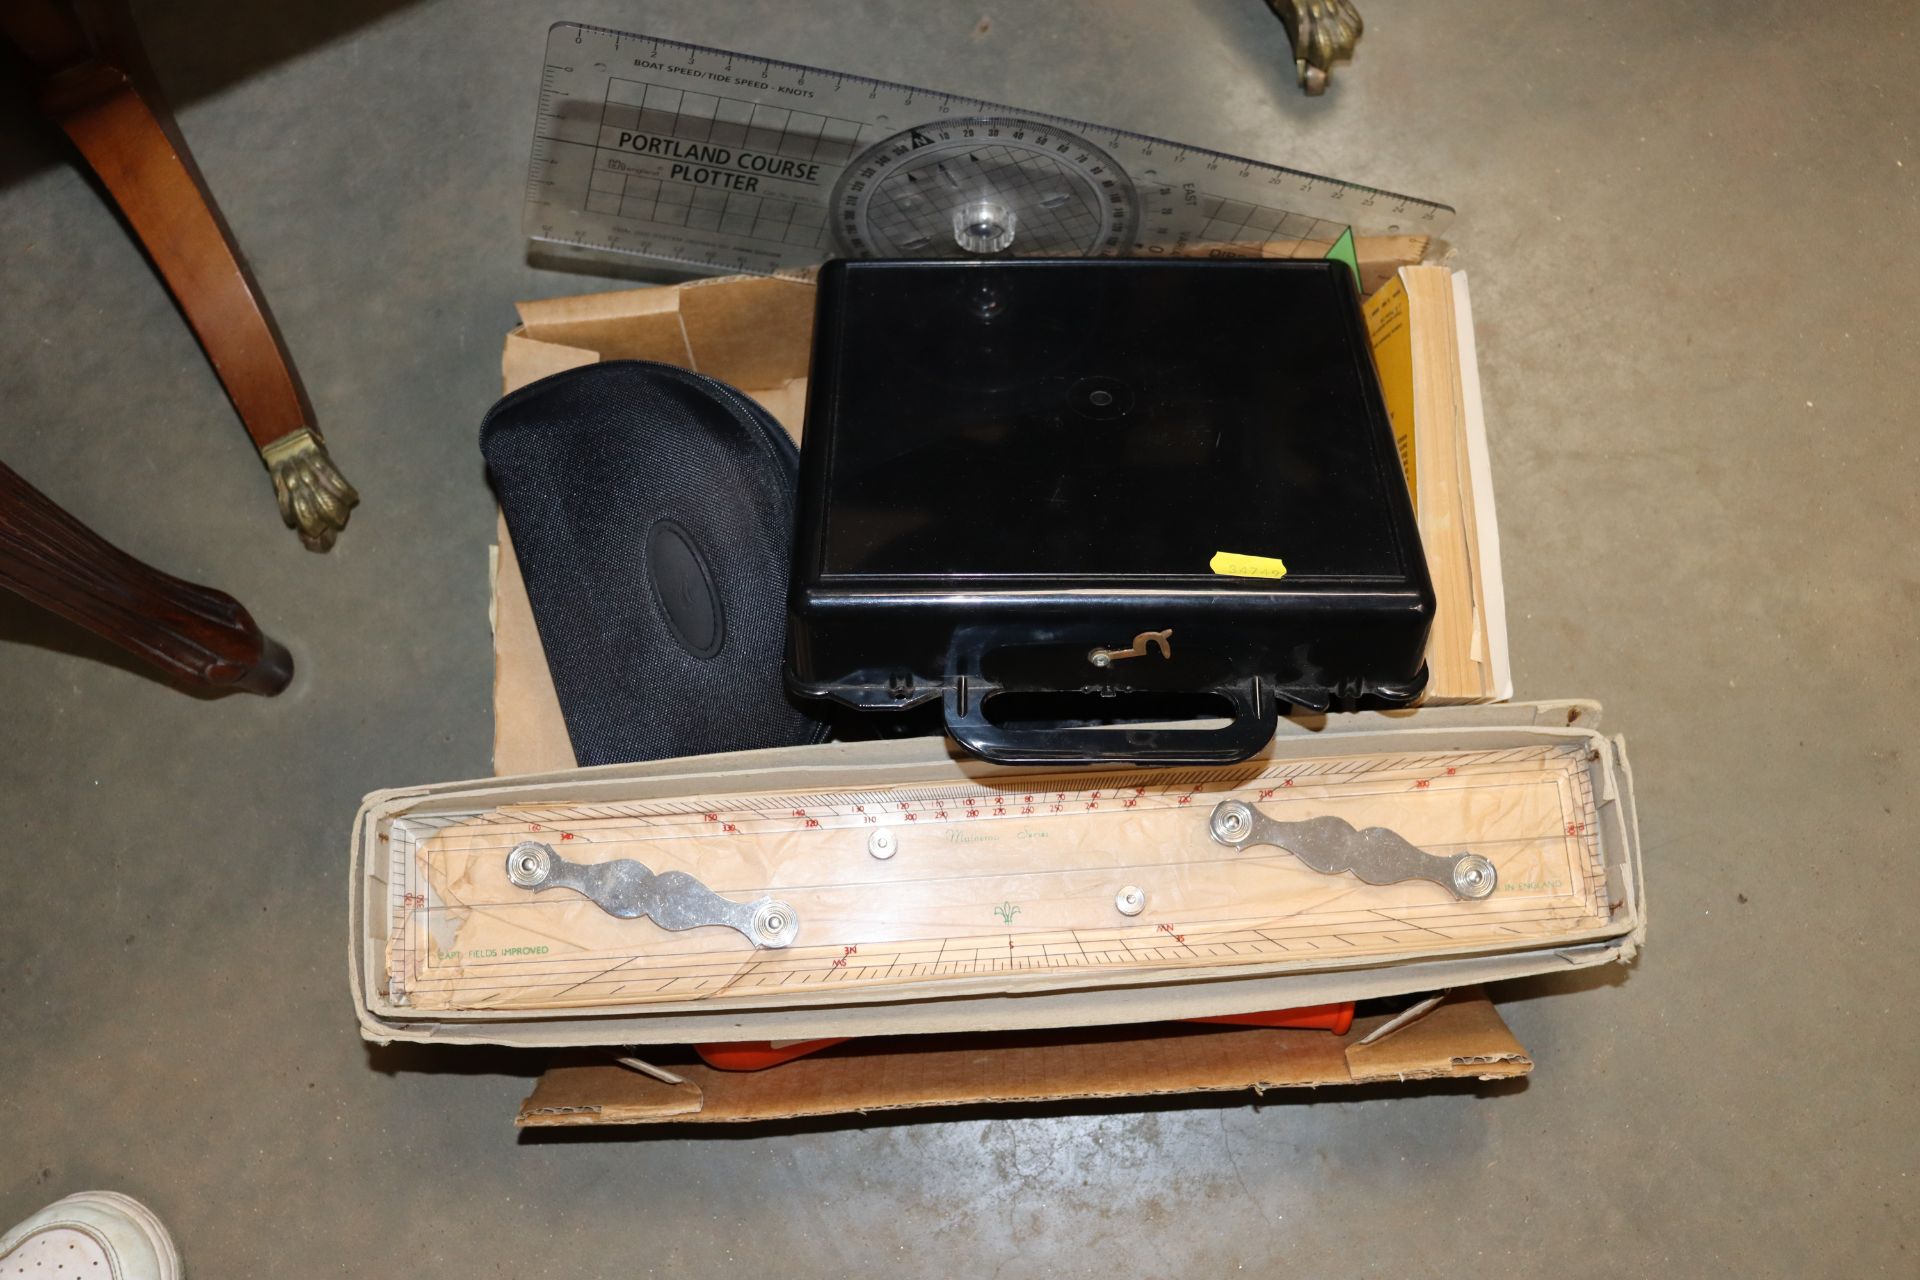 A box containing various navigational equipment including a sextant and sunglasses